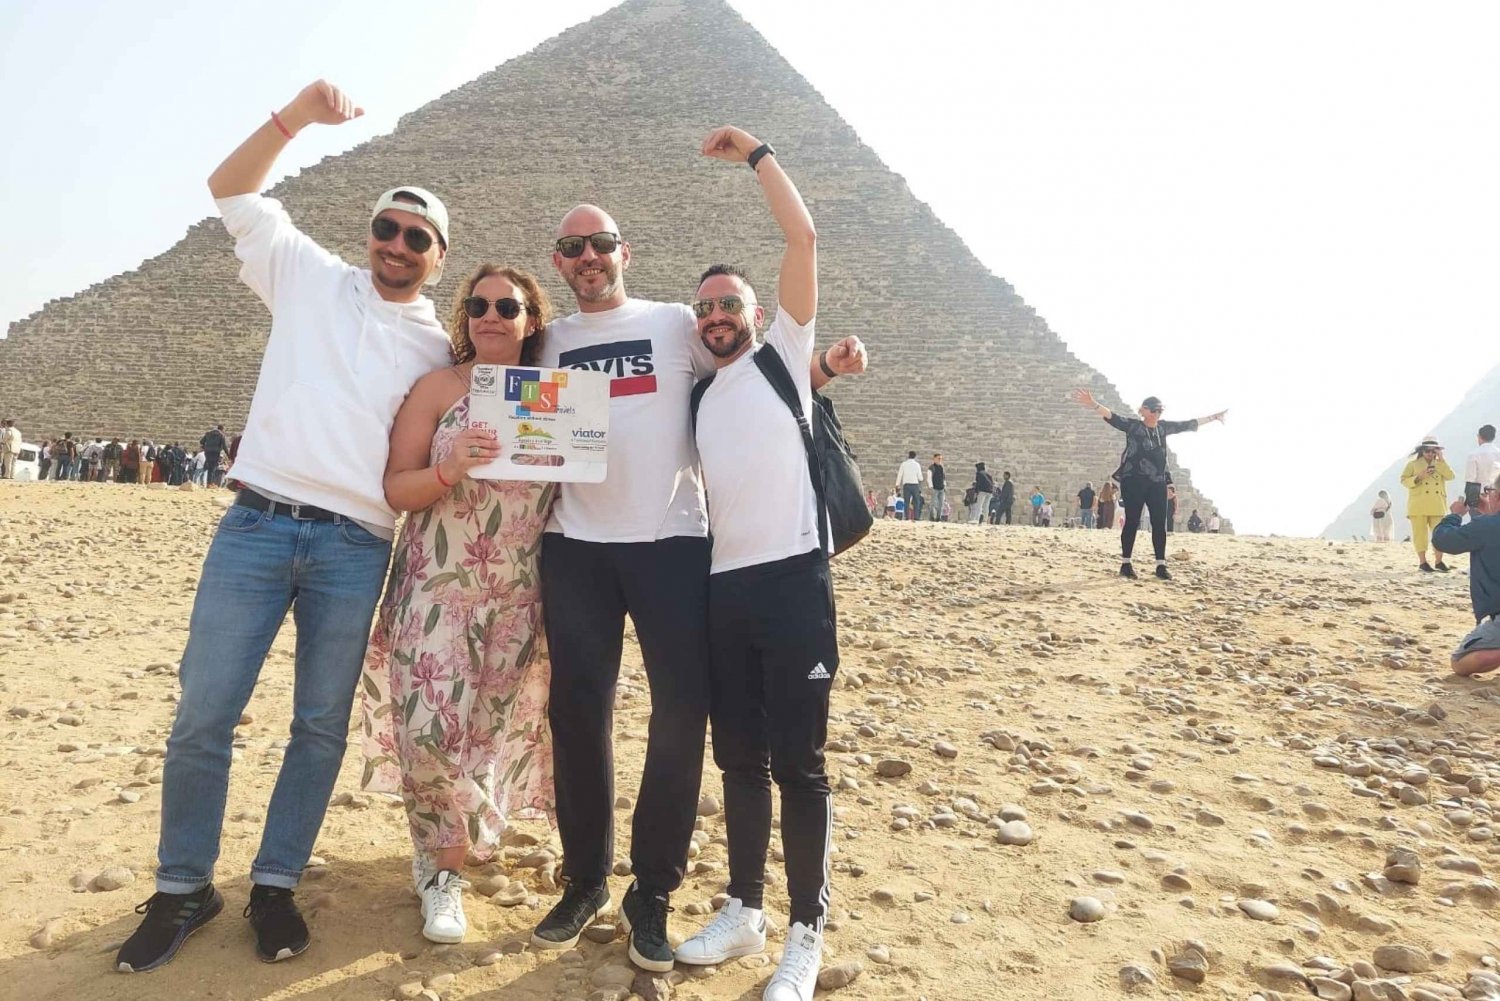 Pyramids-of-Giza-A-Journey-Through-Ancient-History